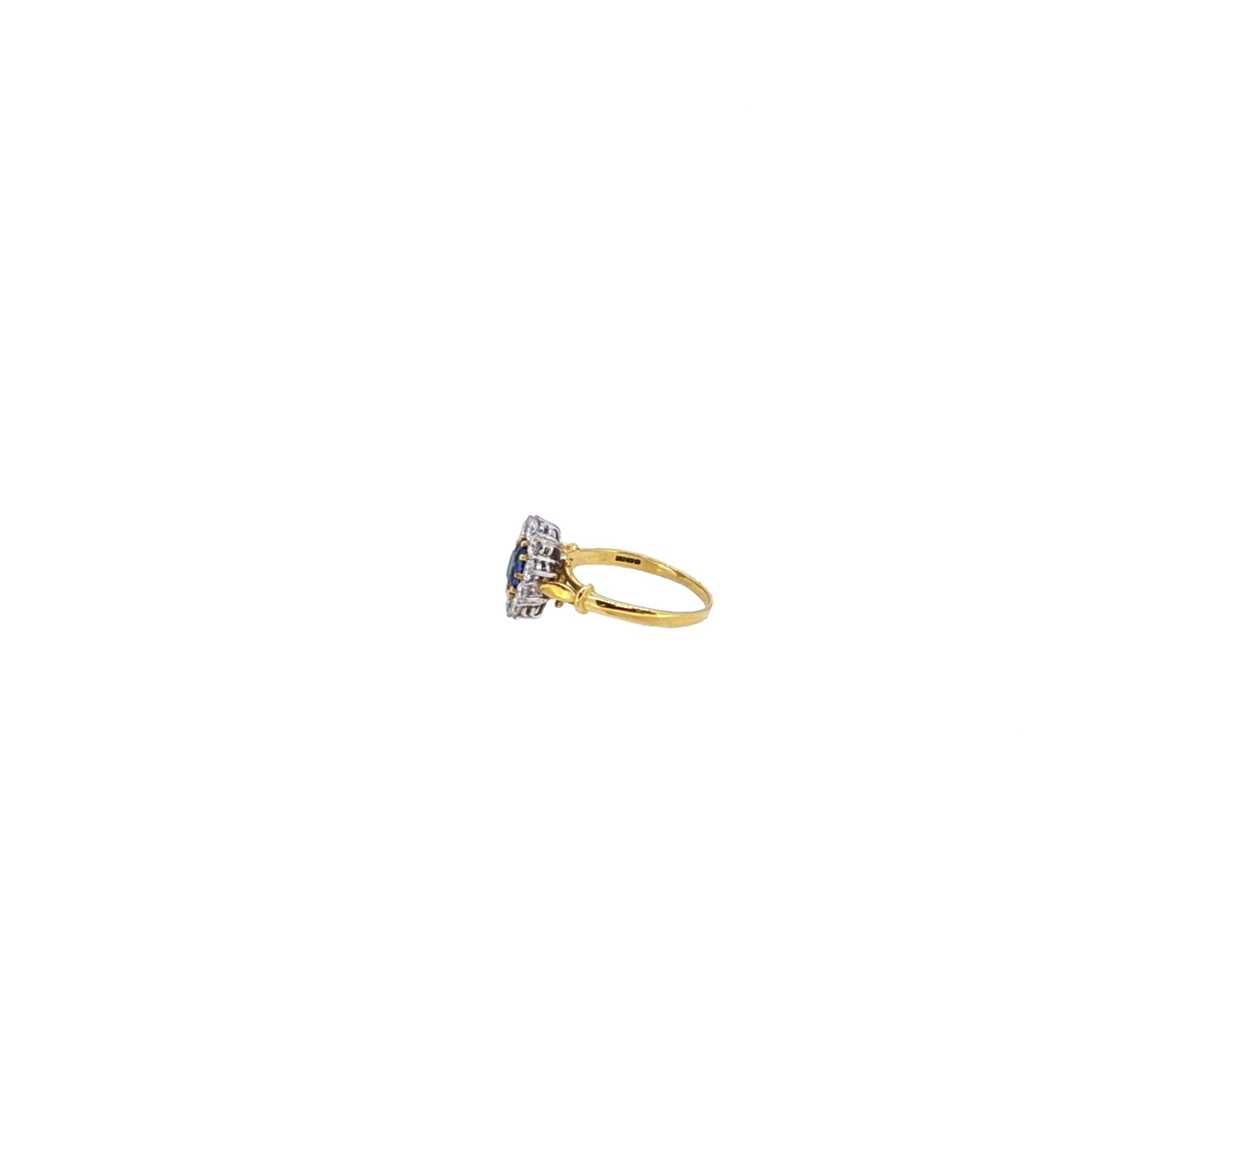 An 18ct gold sapphire and diamond ring, - Image 2 of 4